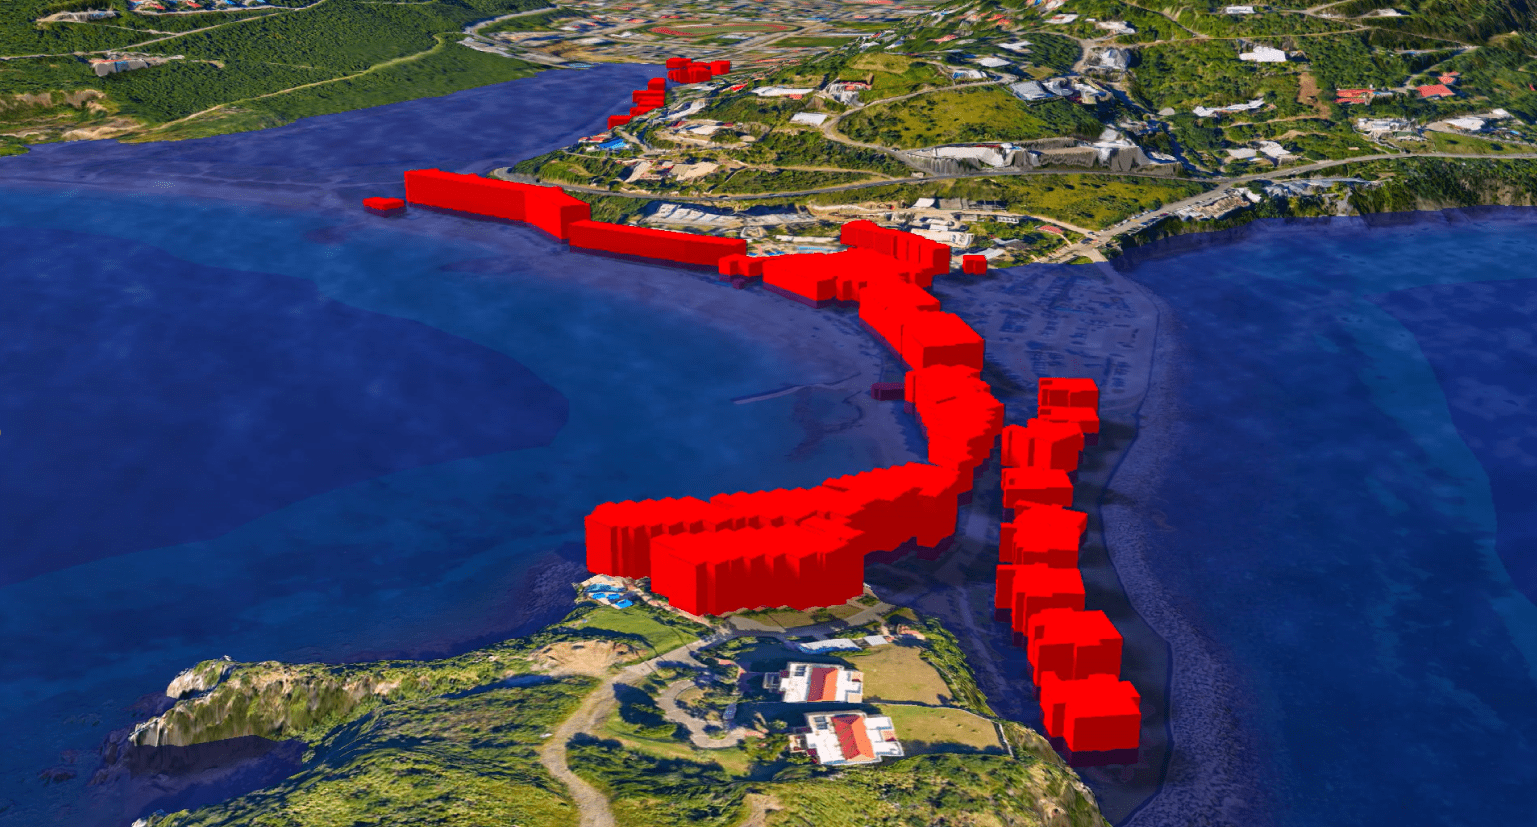 Image: Sea level rise impacts in Sint Maarten in the Caribbean. Credits: Fugro